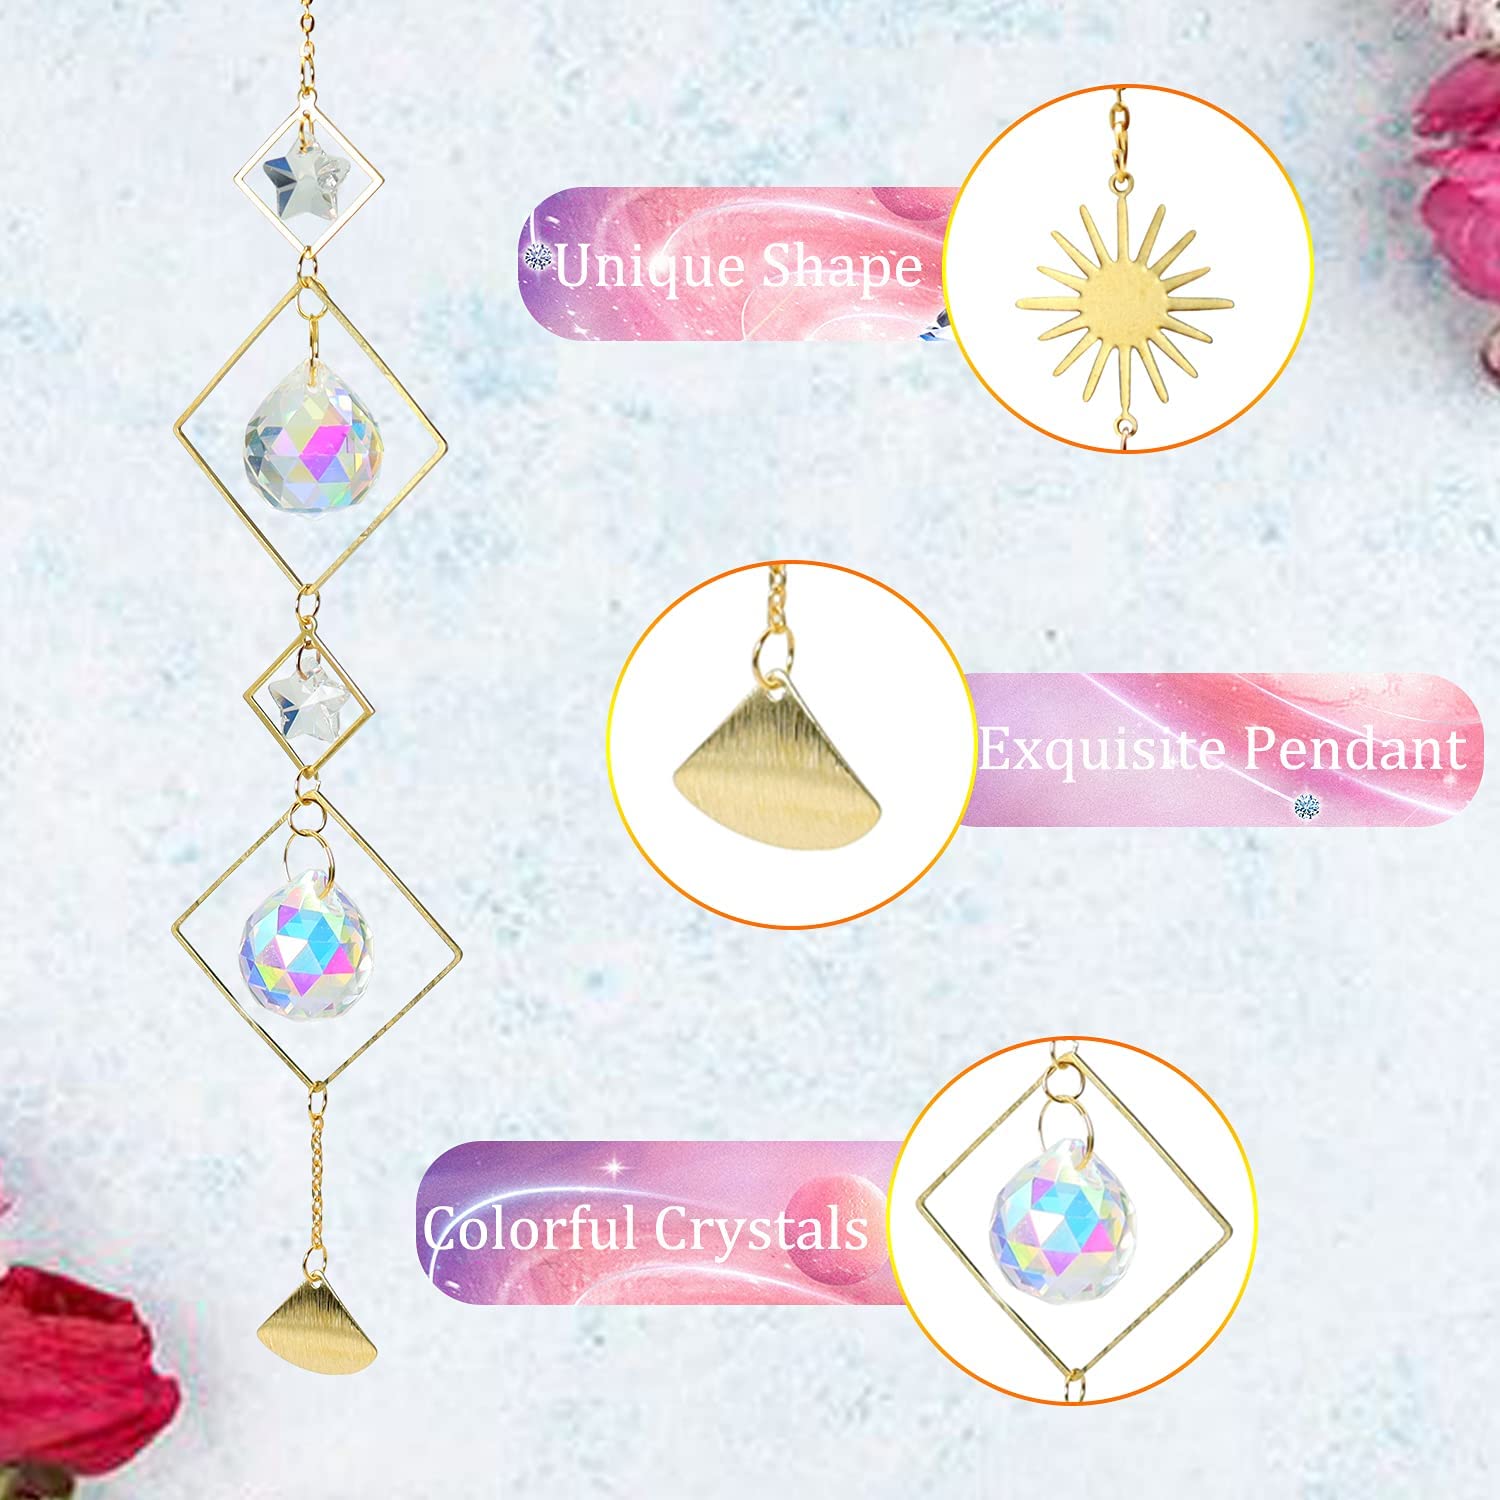 1 Piece Colorful Crystals Suncatcher Hanging Sun Catcher with Chain Pendant Ornament Crystal Balls for Window Home Garden Christmas Day Party Wedding Decoration - image 2 of 6